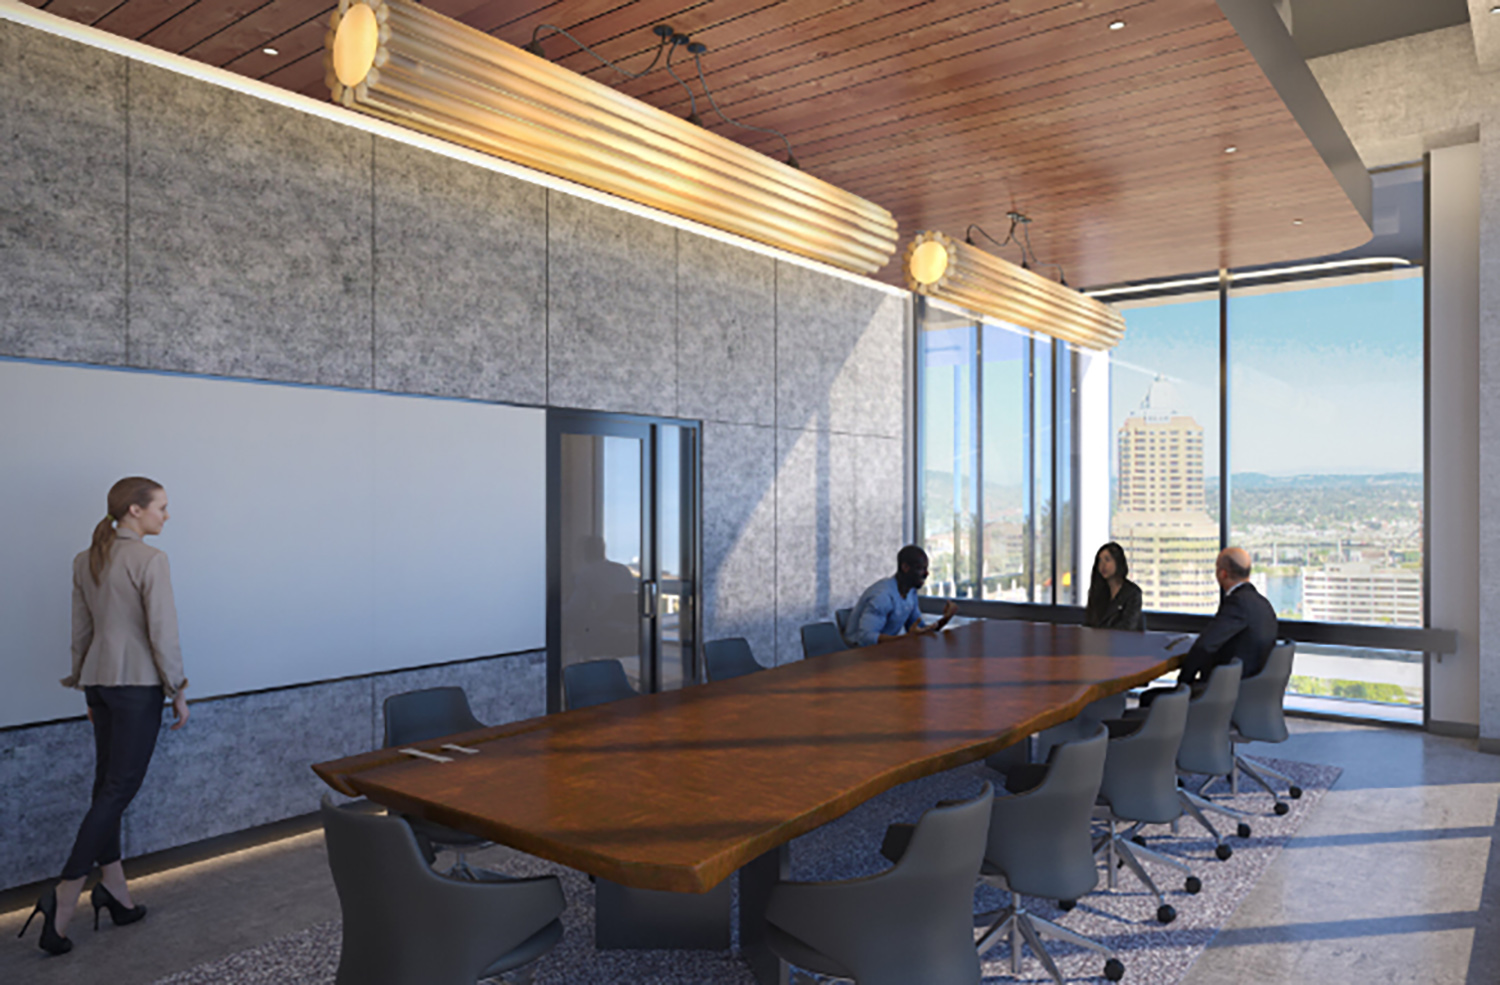 Conference Facility at 311 W Huron Street. Rendering by NORR Architects